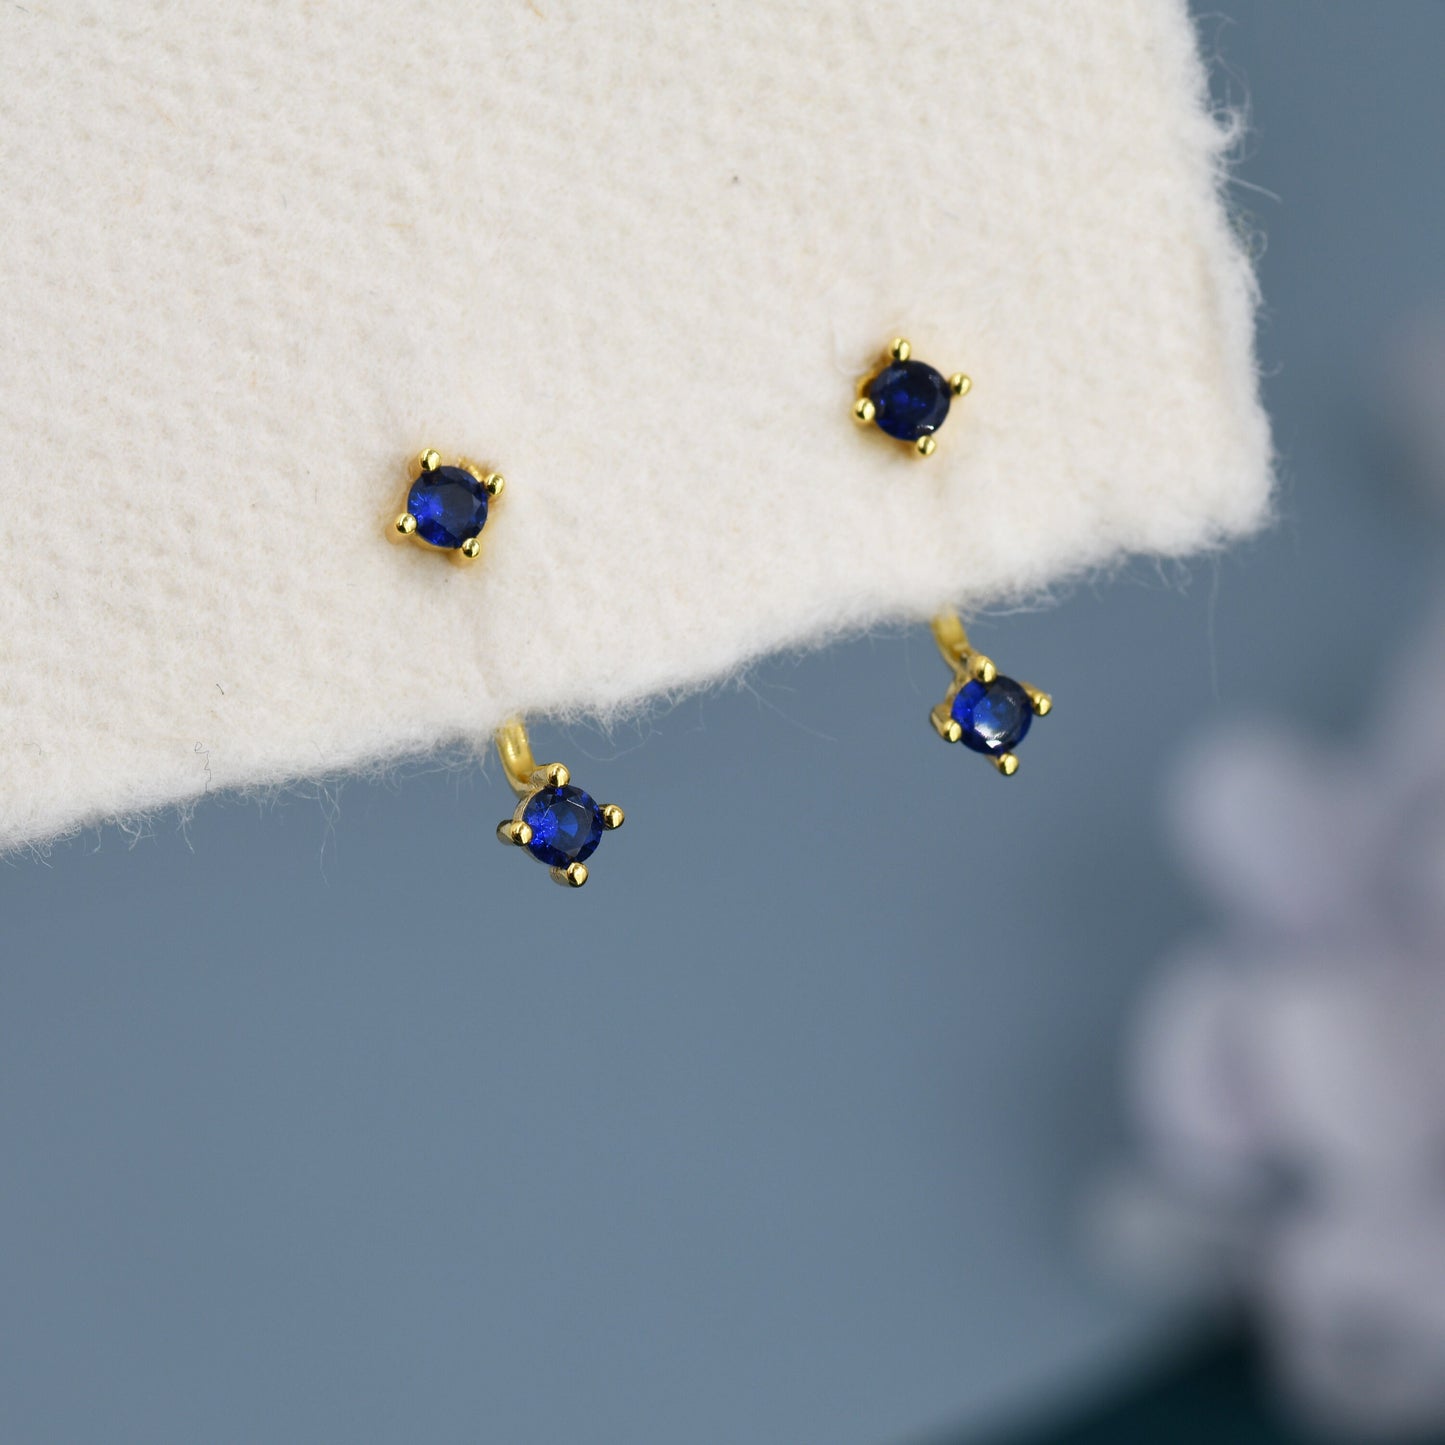 Double Sapphire Blue CZ Ear Jacket in Sterling Silver,  Silver or Gold, Front and Back Earrings, Two Part Earrings